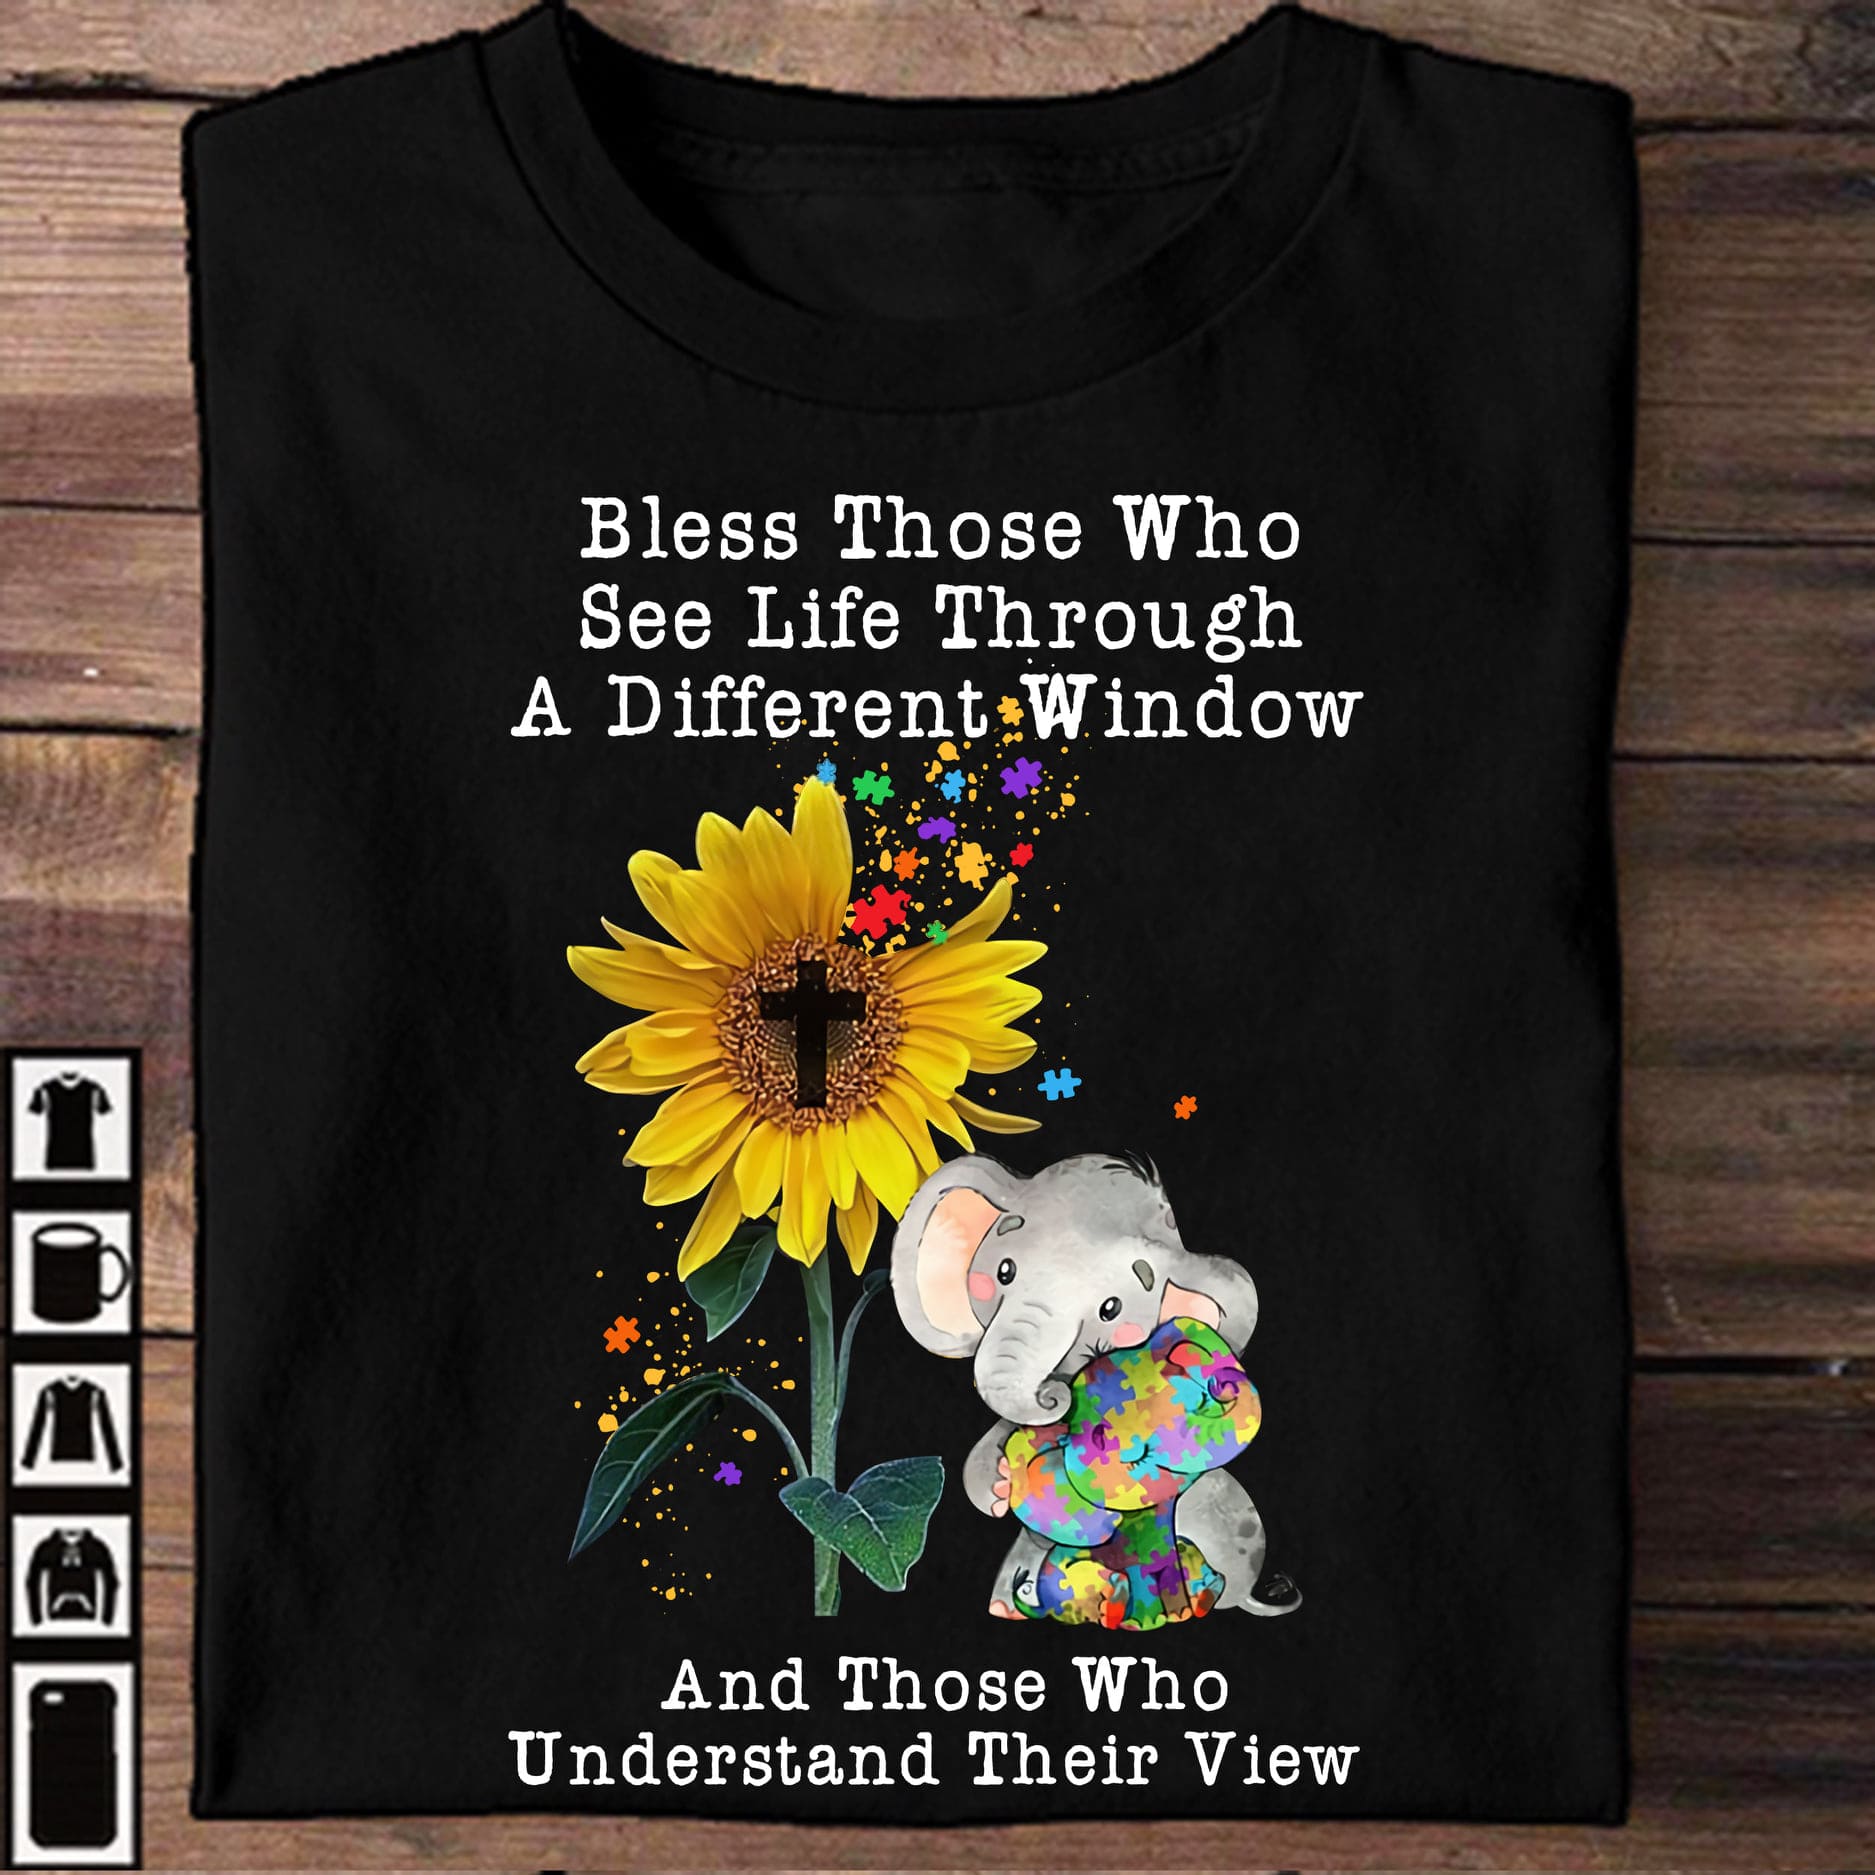 Autism Family Sunflower - Bless those who see life through a different window and those who underestand their view